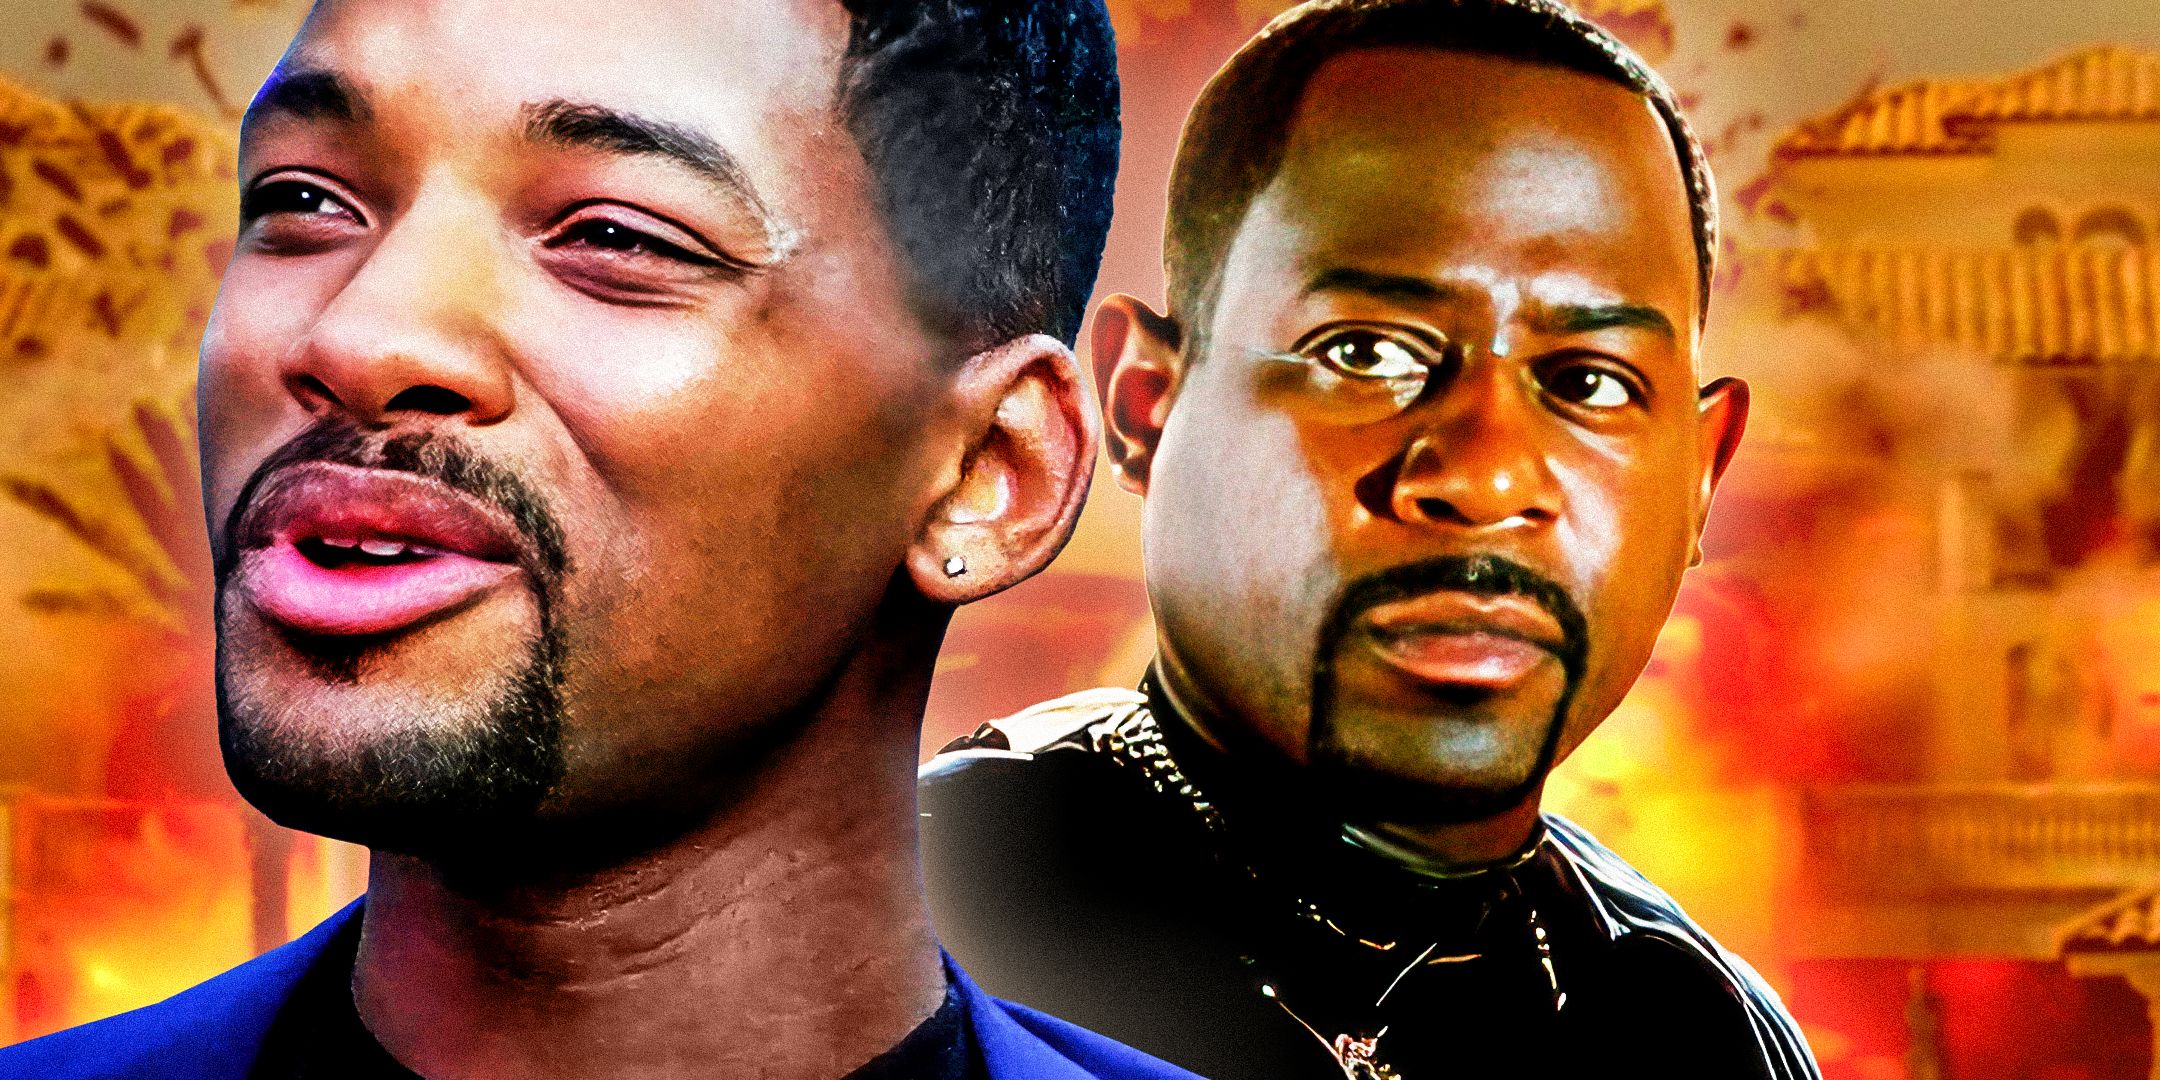 10 Incredible Bad Boys Scenes From All 3 Movies That Set The Bar Very High For Bad Boys 4